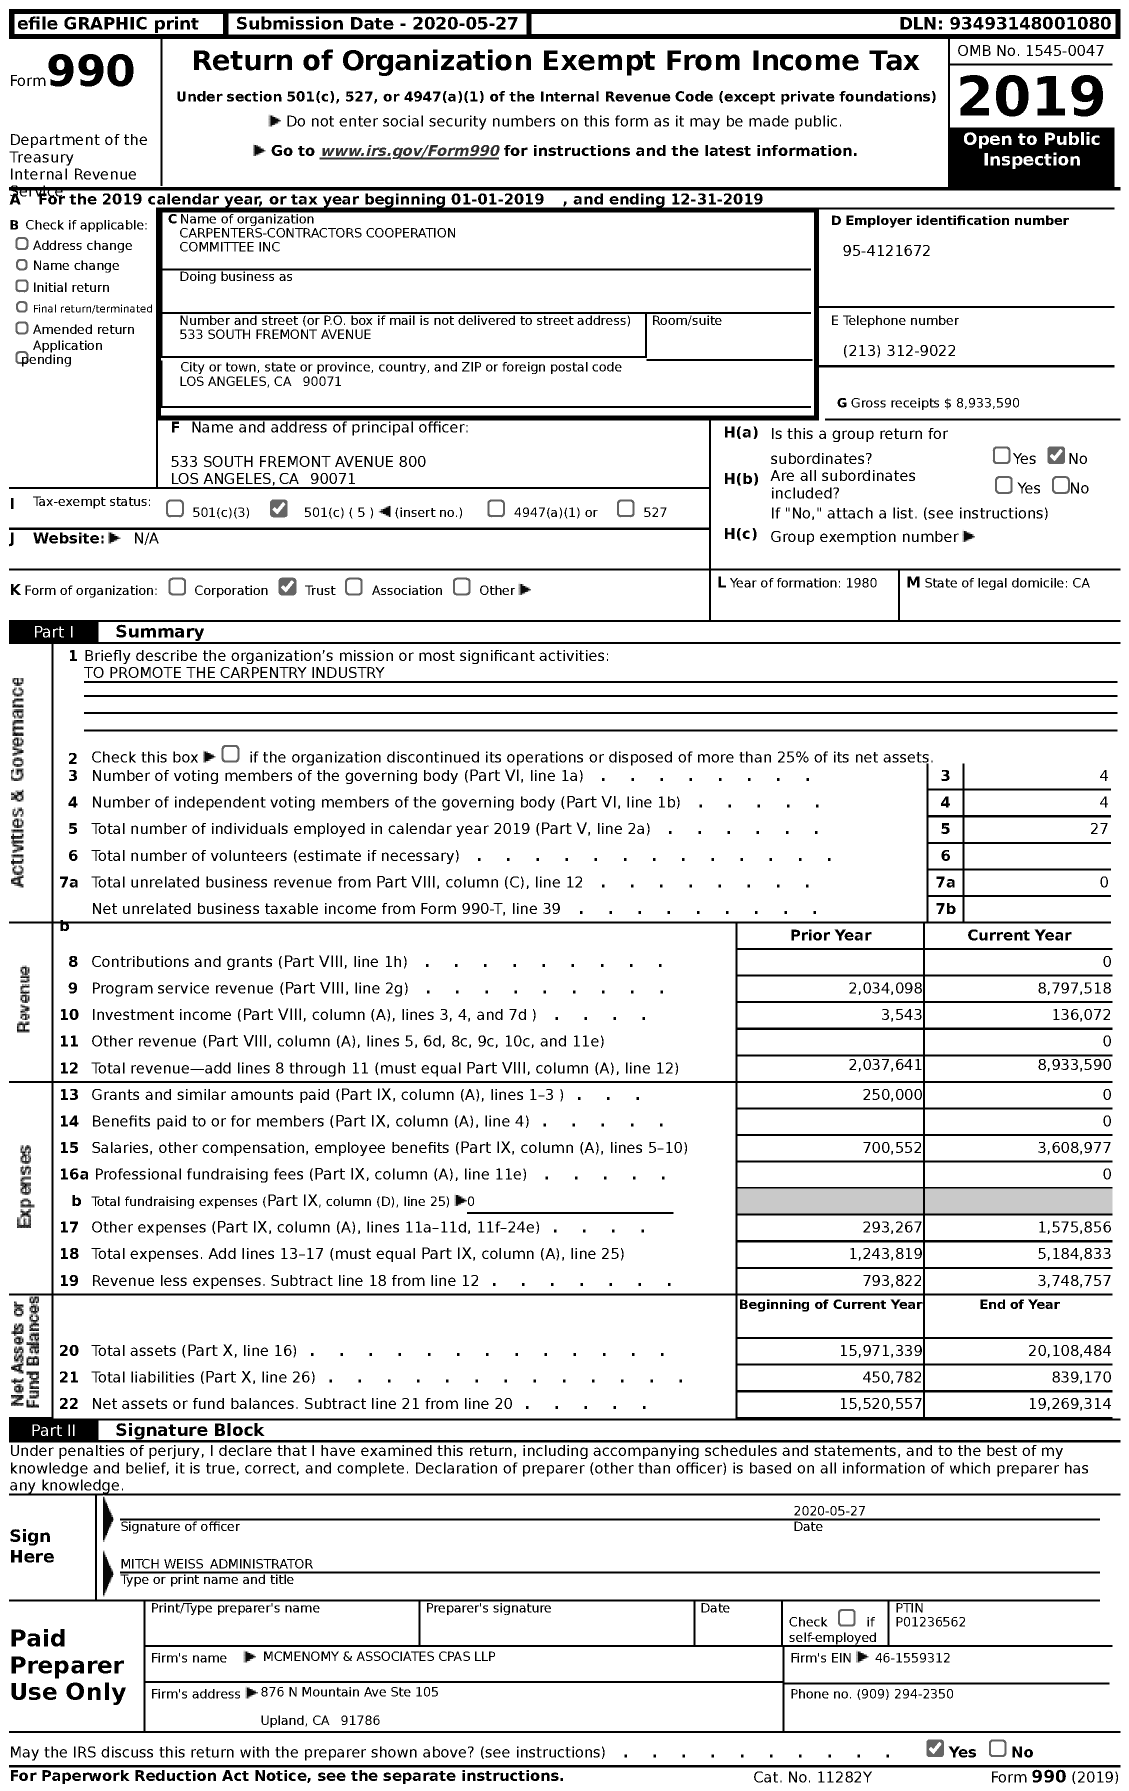 Image of first page of 2019 Form 990 for Carpenters-Contractors Cooperation Committee